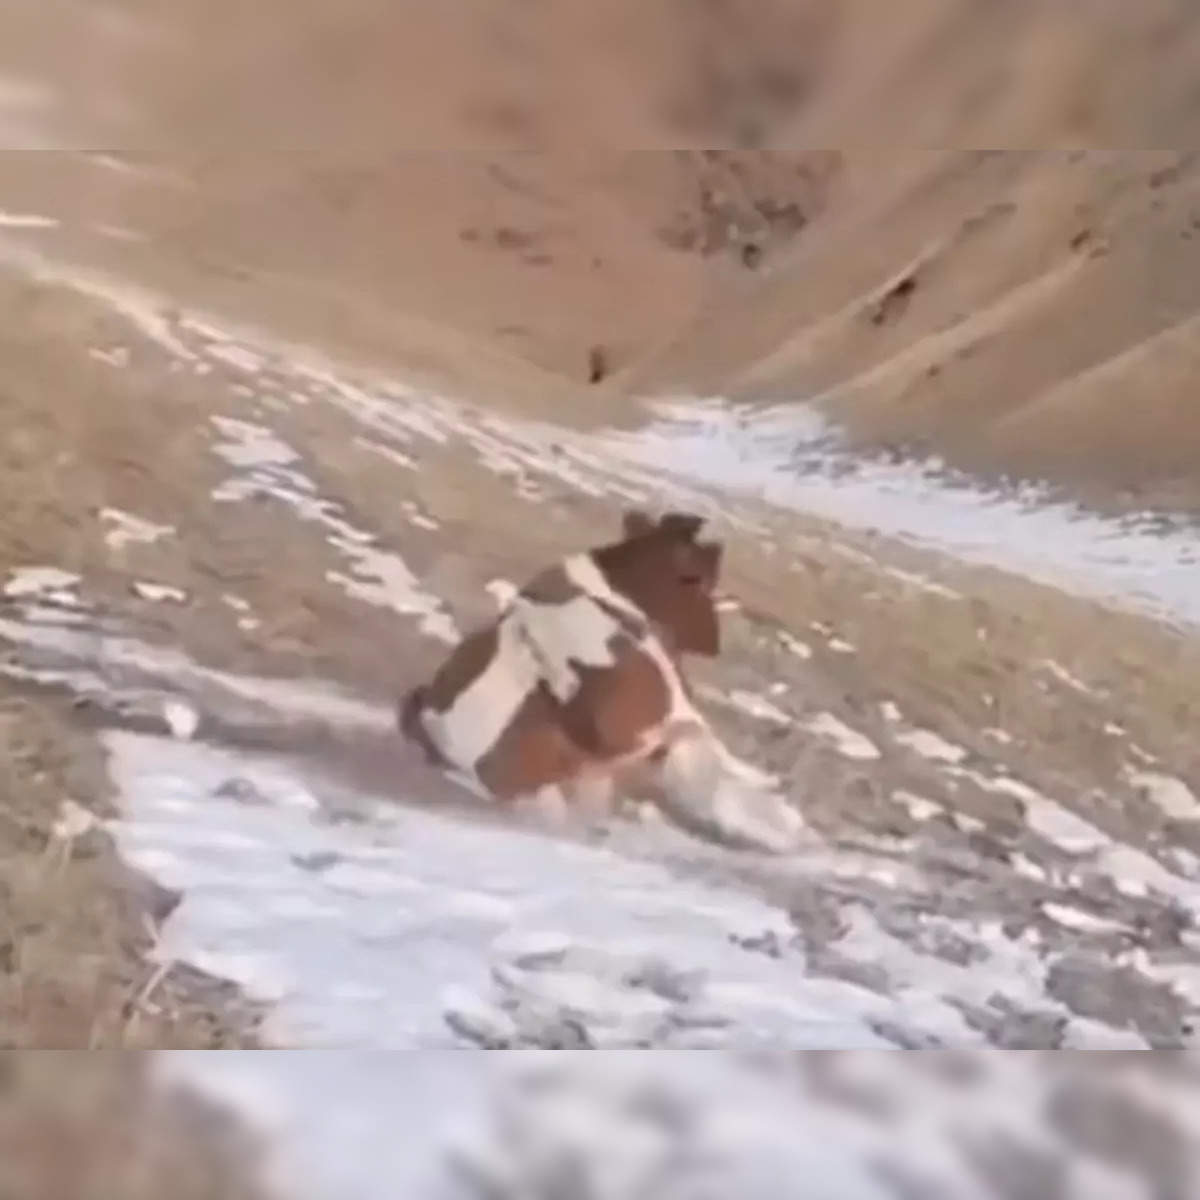 Cow Snow Sliding: Watch: Cow sliding down snowy hill amuses